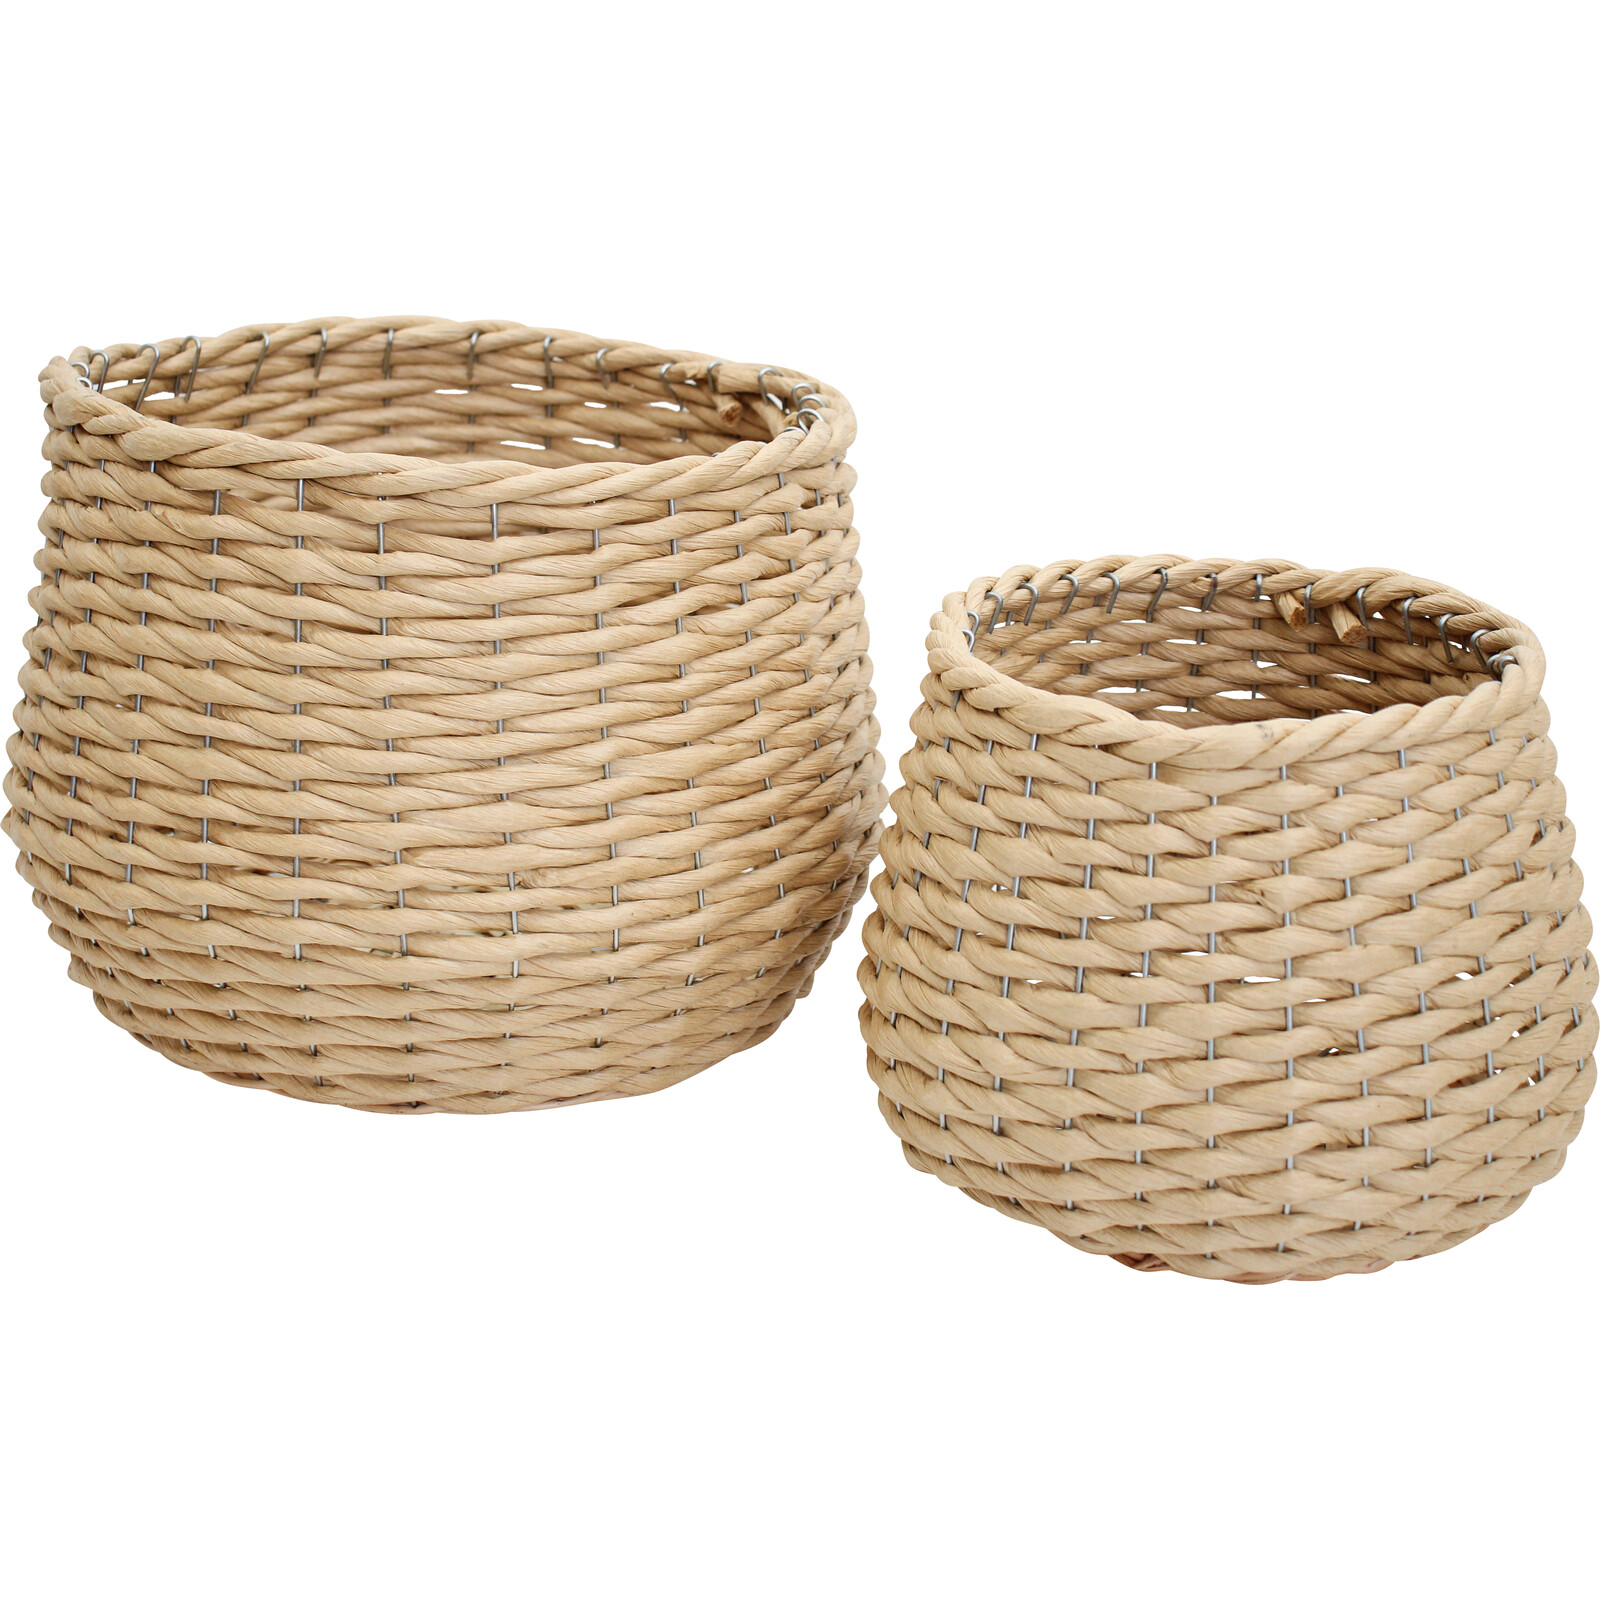 Planters S/2 Woven Ivy